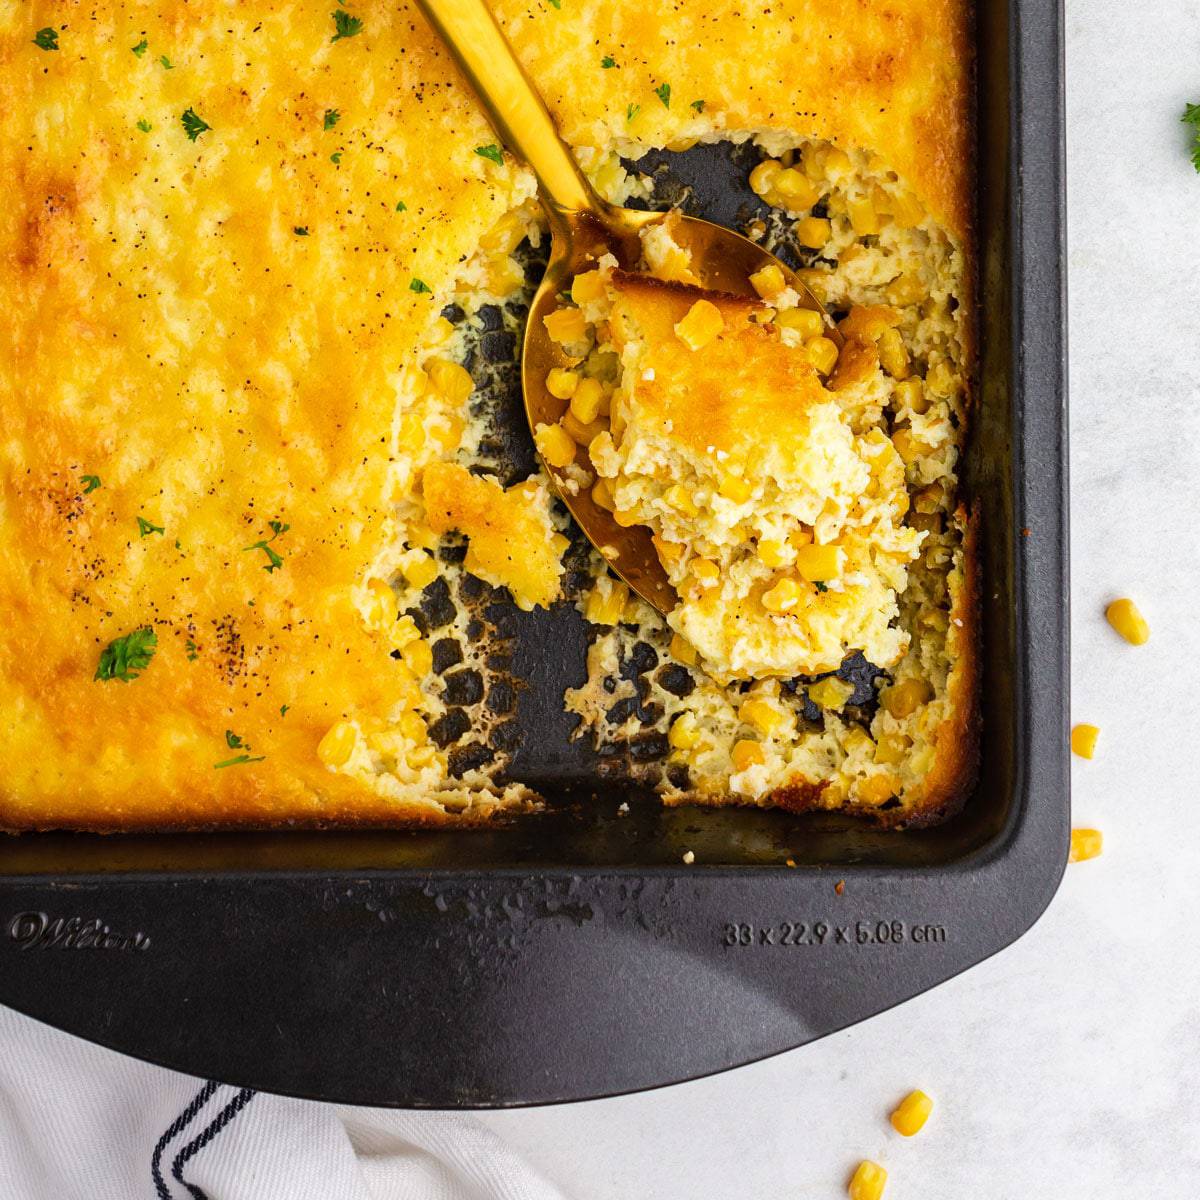 A pan of corn pudding with a spoon